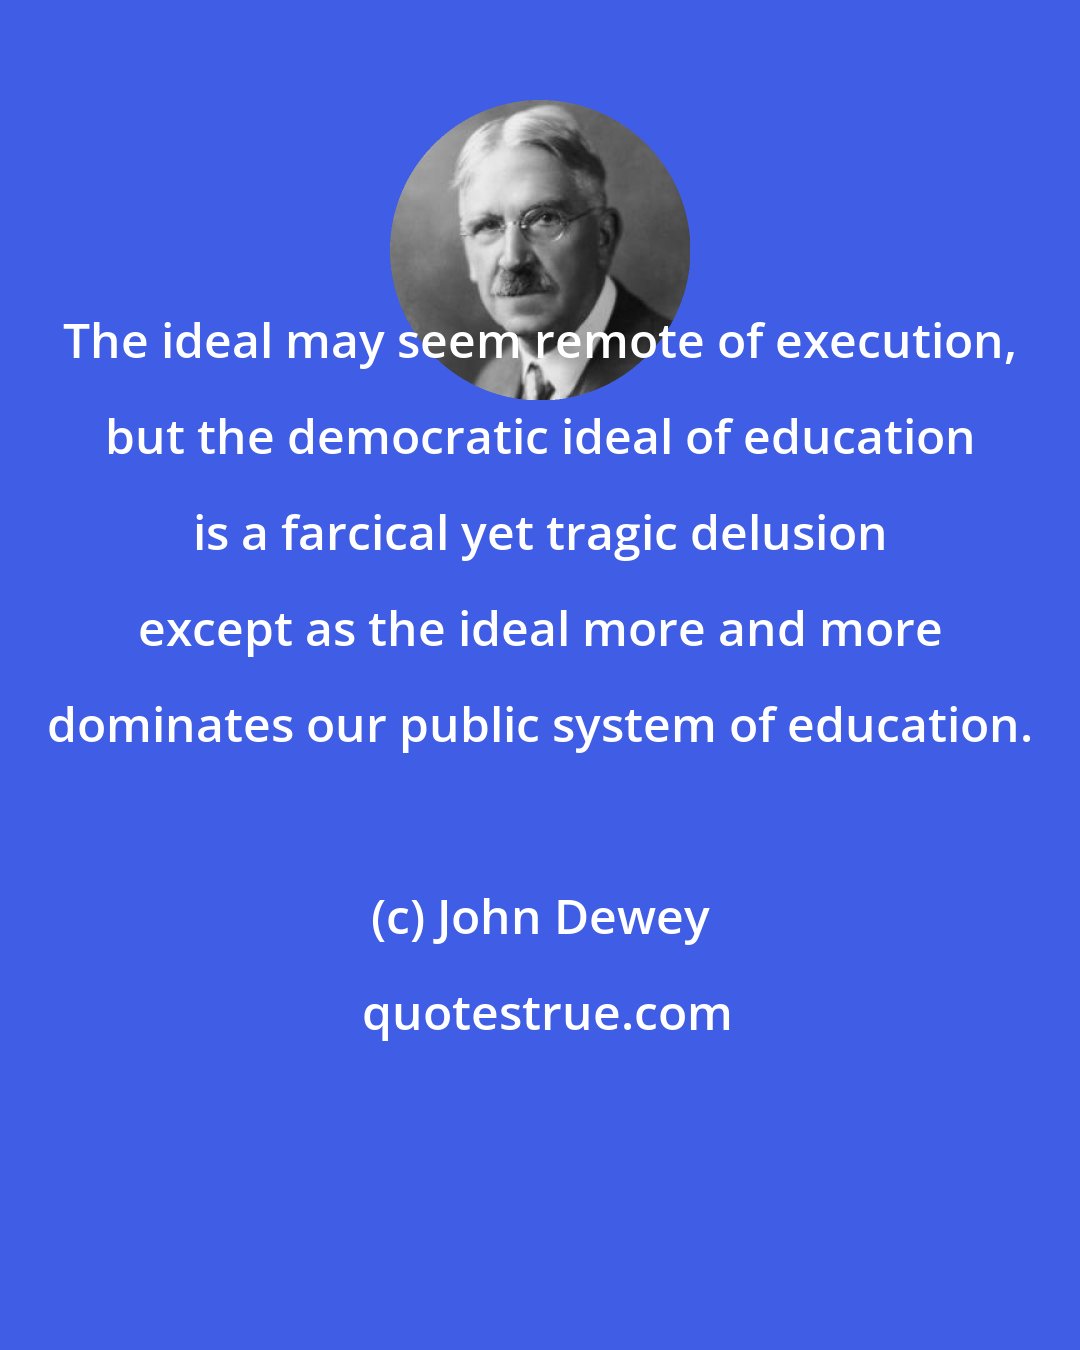 John Dewey: The ideal may seem remote of execution, but the democratic ideal of education is a farcical yet tragic delusion except as the ideal more and more dominates our public system of education.